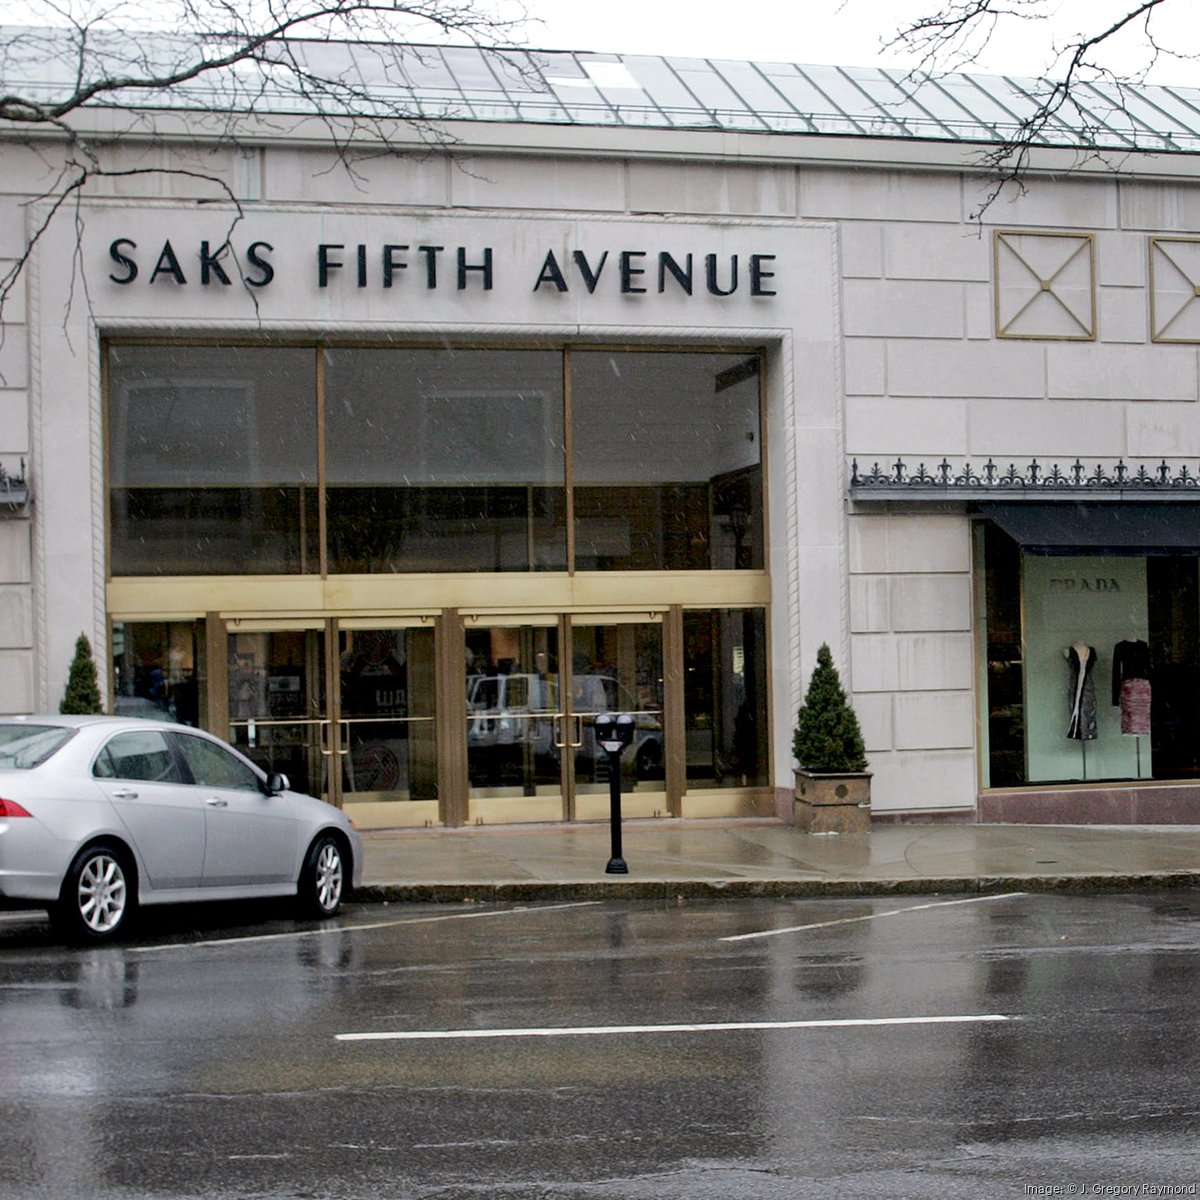 Must Read: Saks Fifth Avenue to Break From its Online Business